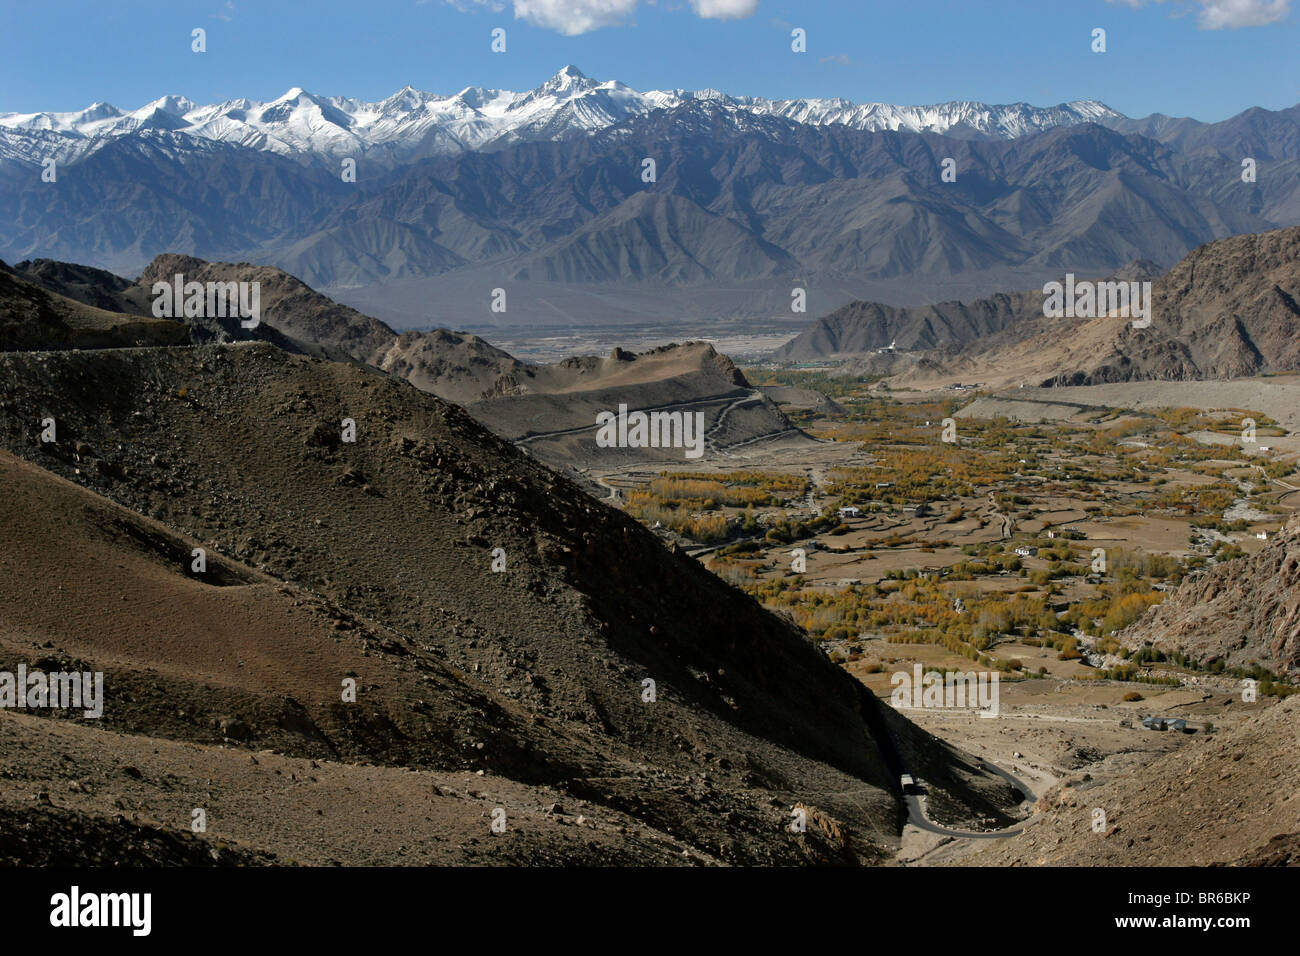 An overview of the road to the Khardung La pass, claimed to be the highest motorable road in the world, in Ladakh, India. Stock Photo